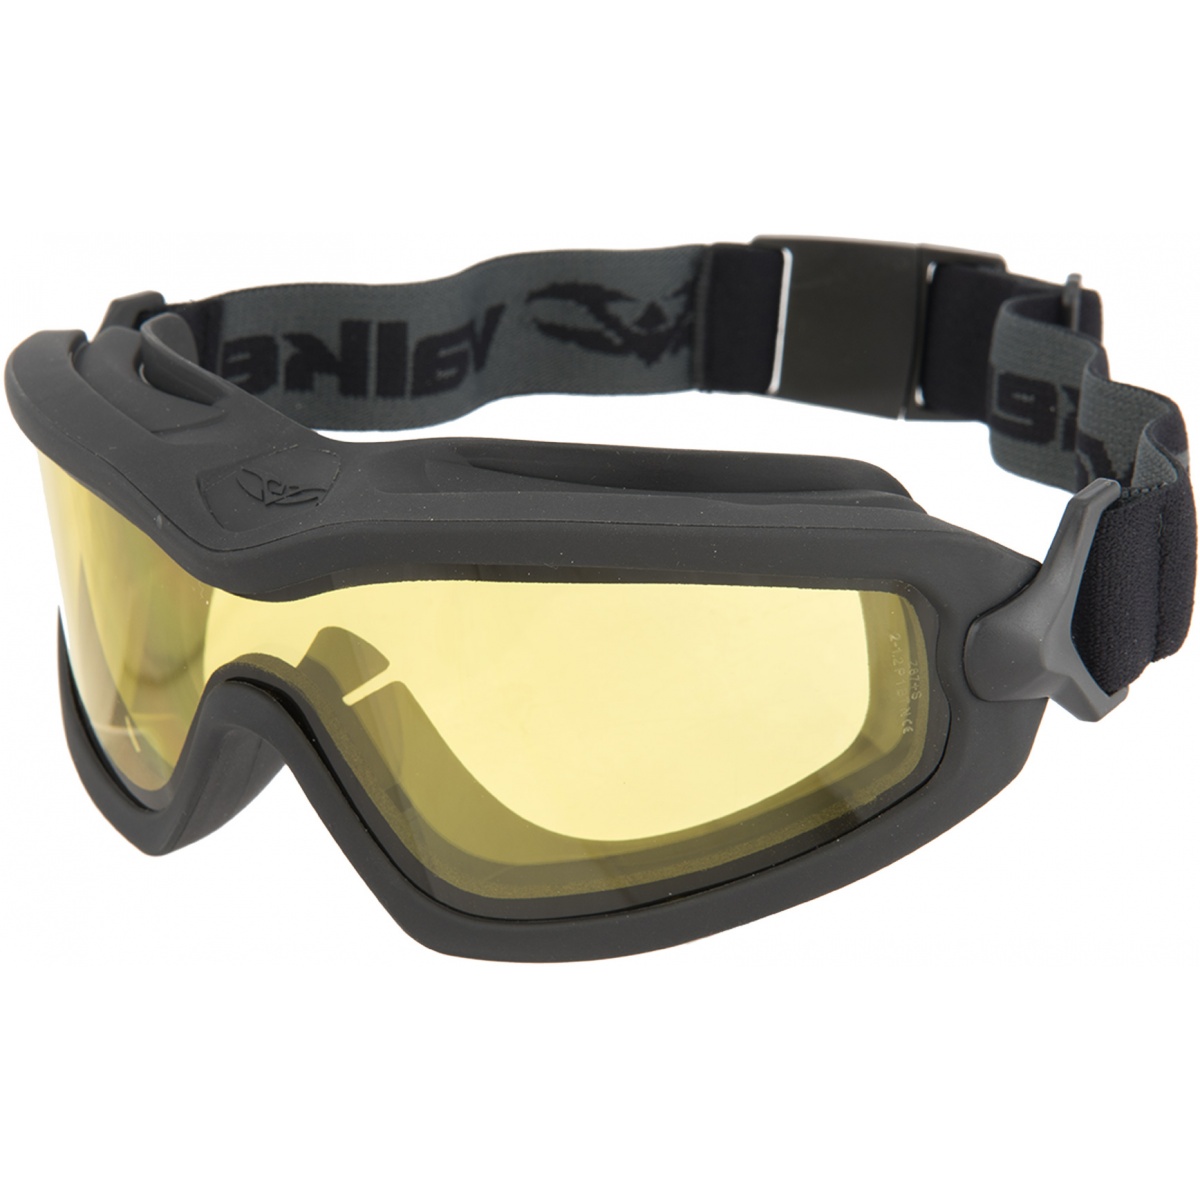 Valken Sierra Dual Pane Airsoft Air Soft Anti Fog Protective Goggles Yellow for sale online 